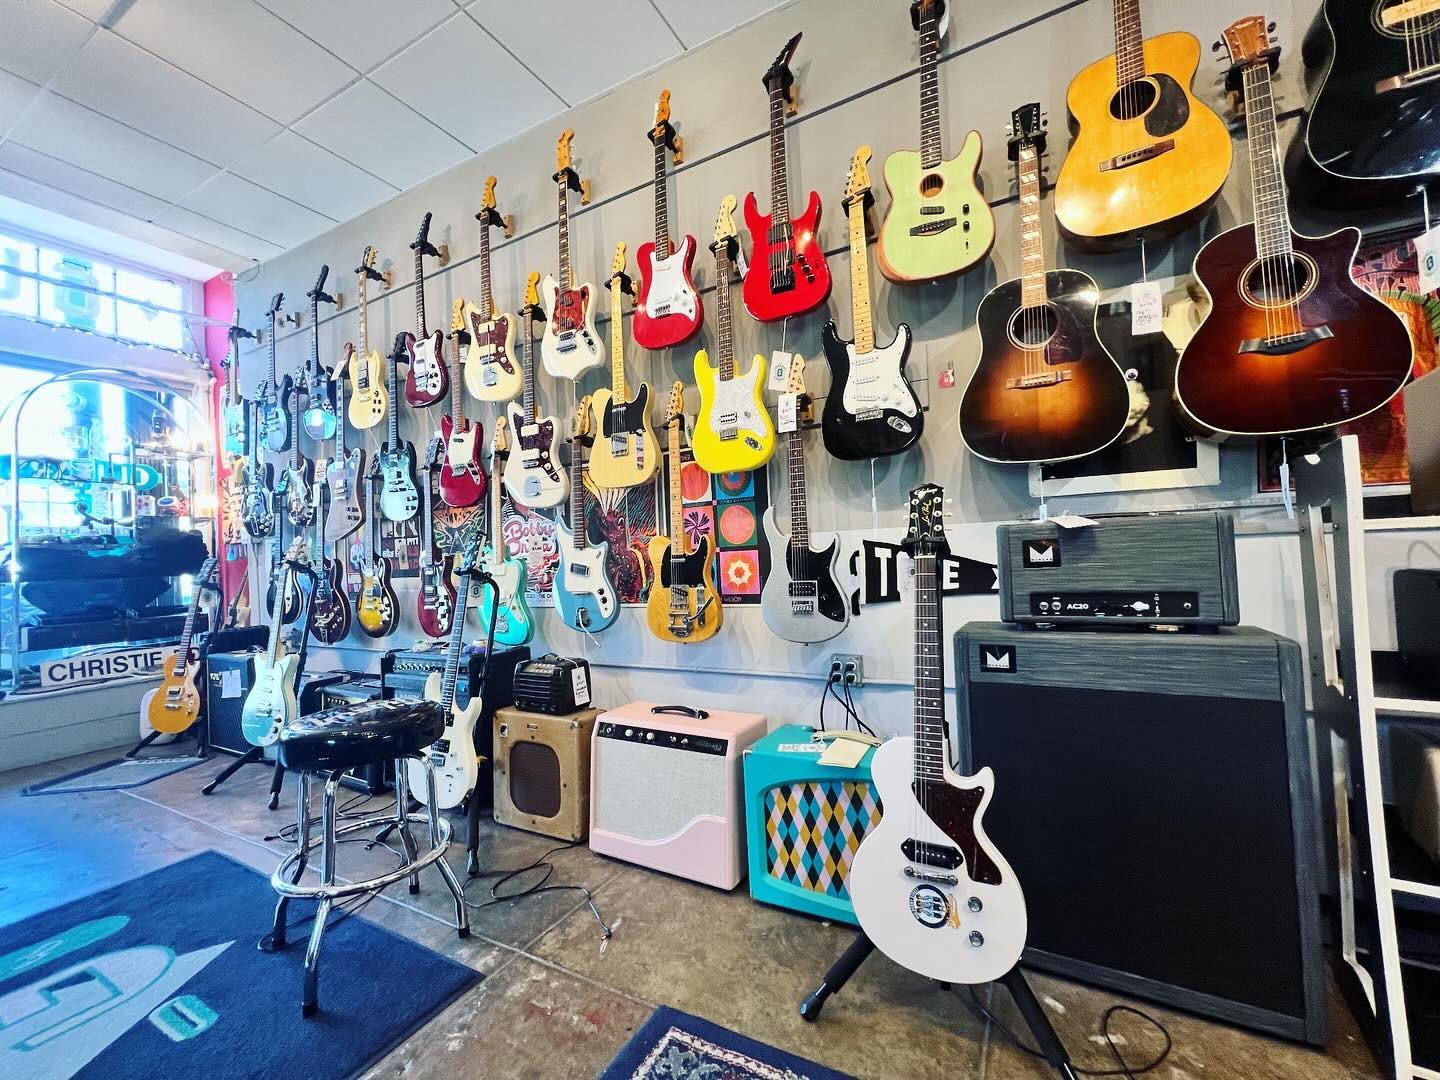 All the pretty colors on The Wall! The Wall wants you to see them, meet them. All of them one The Wall! Some amps on sale too! #oaklandguitars